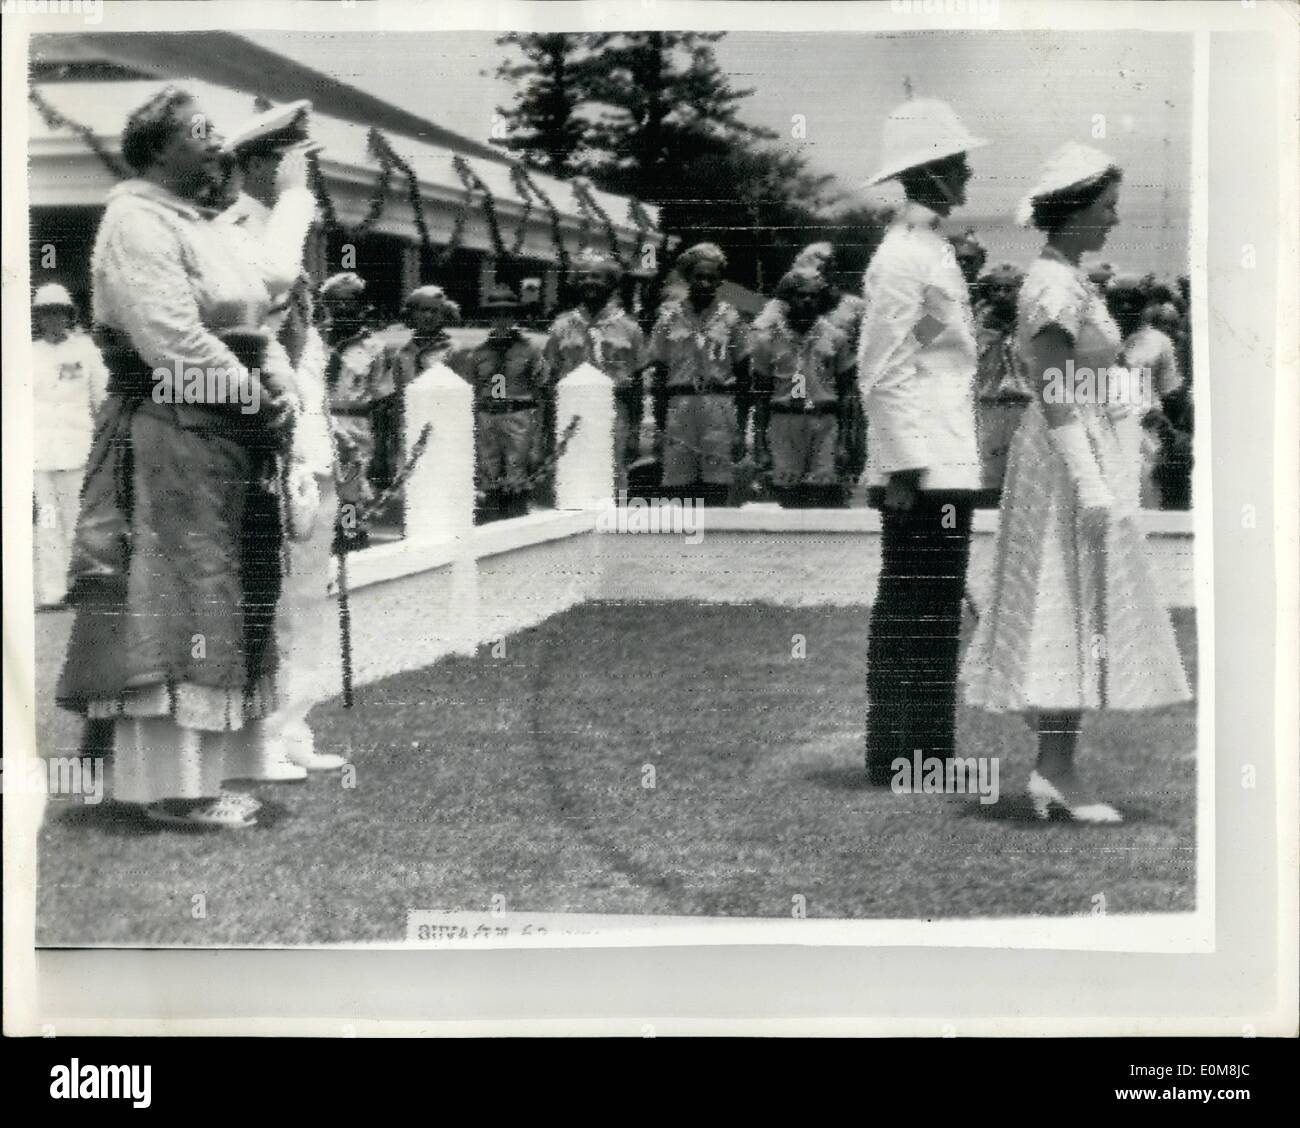 Dec. 12, 1953 - Queen Elizabeth Arrives In Tonga: Queen Elizabeth continuing her Royal Tour arrived in Tonga from Suva, Fiji, it was a day of cheering, dancing and feasting. Tonga's great welcome started with two of the World's reigning Queen's sharing a joke that began on Coronation Bay. As the Queen and the towering Queen Salote drove off From the fastooned wharf a cloud sent down a ''Token'' shower, a gentle reminder of Coronation Day Stock Photo